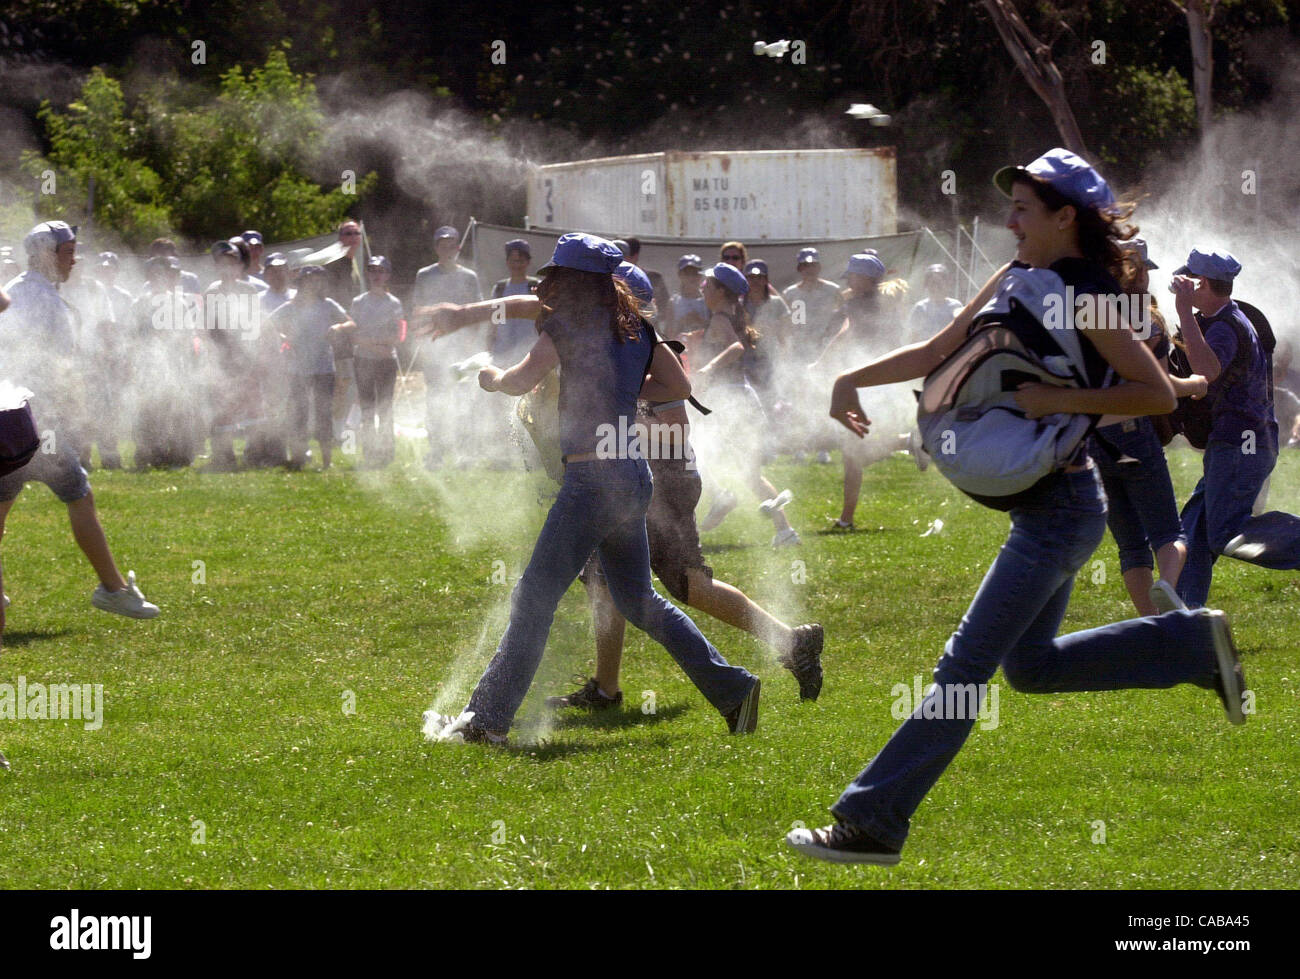 Walnut Creek Intermediate eighth graders participate in a re-enactment of the Civil War at the school in Walnut Creek, Calif. on Friday, May 14, 2004.  The students are using balls of flour for ammunition.  (Contra Costa Newspapers/Tue Nam Ton) Stock Photo